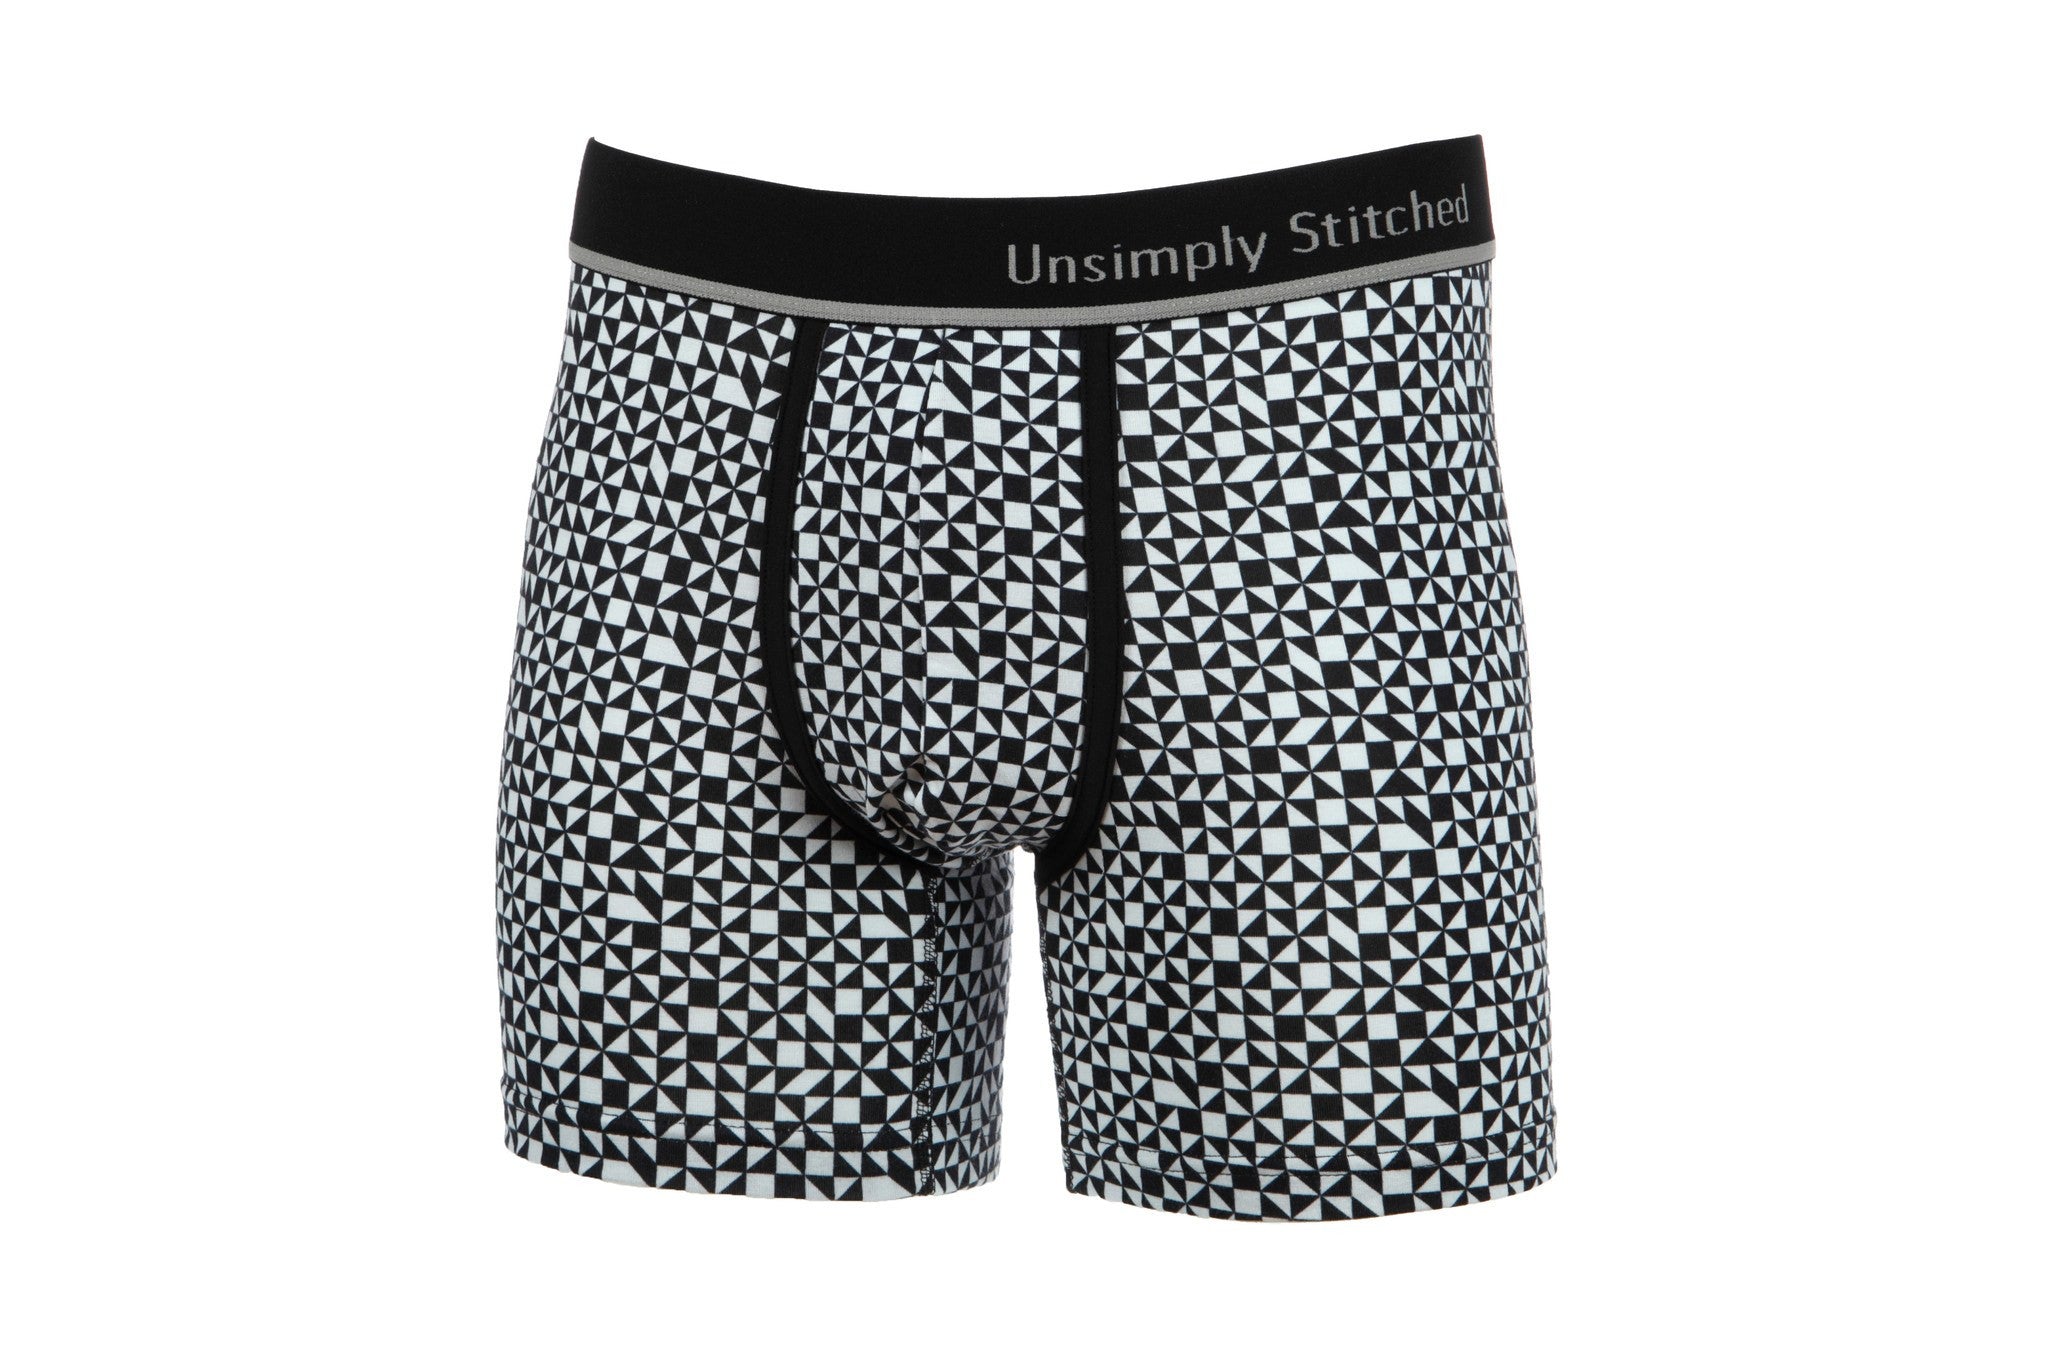 Boxer Brief – Unsimply Stitched